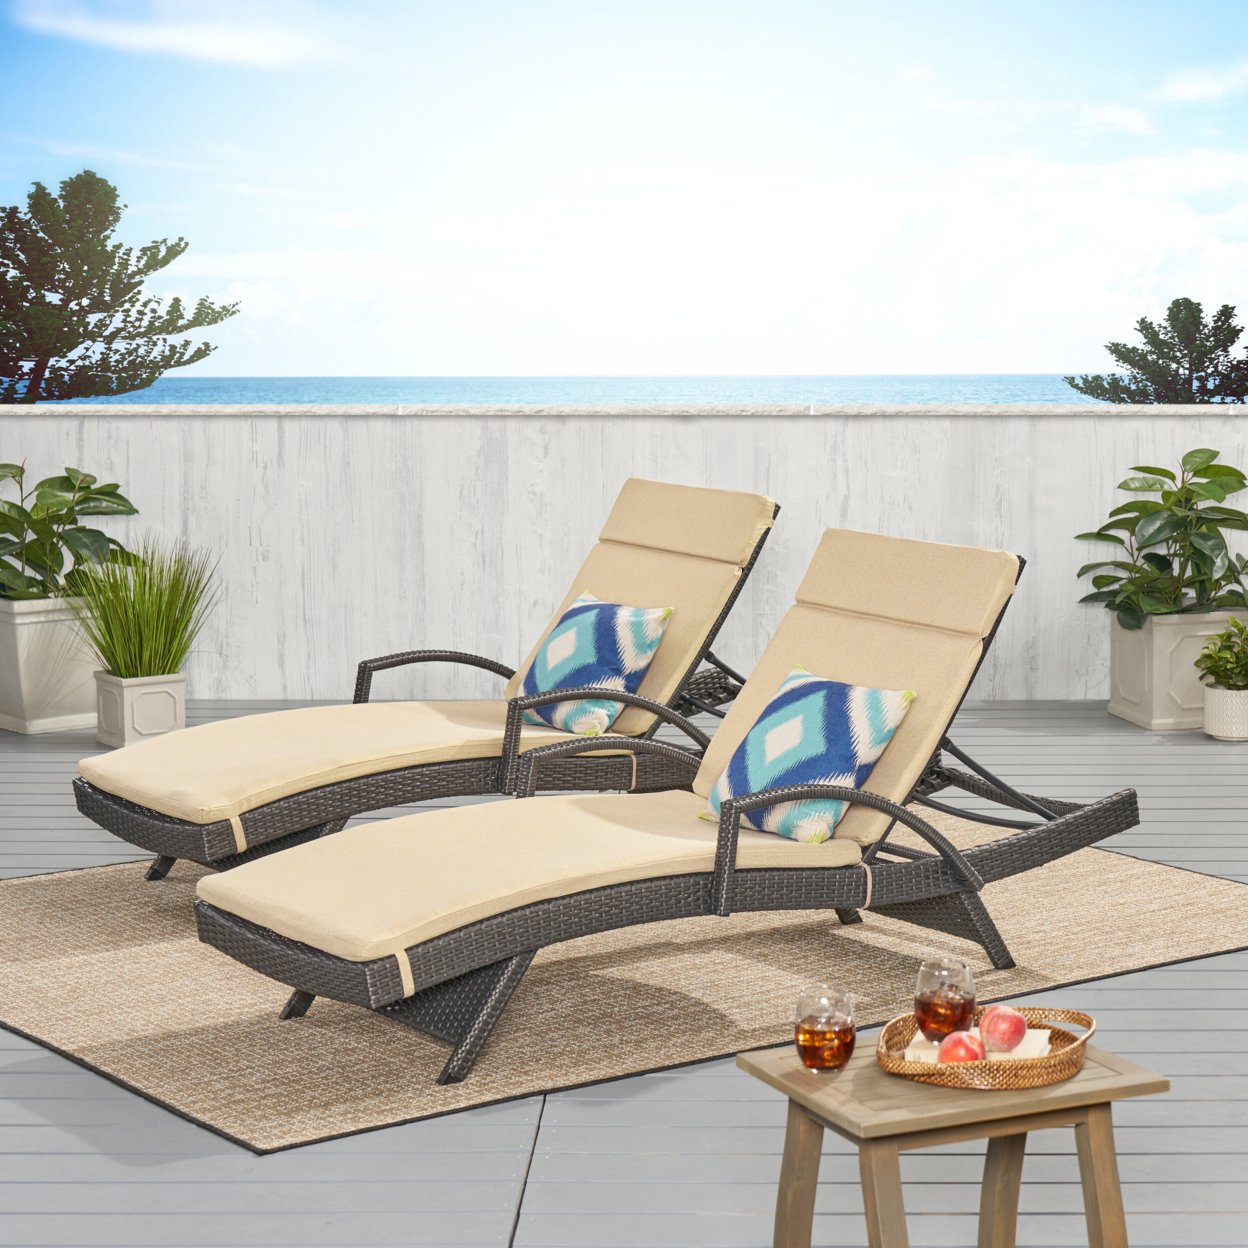 Soleil Outdoor Wicker Chaise Lounges With Water Resistant Cushions (Set Of 2) - Textured Beige